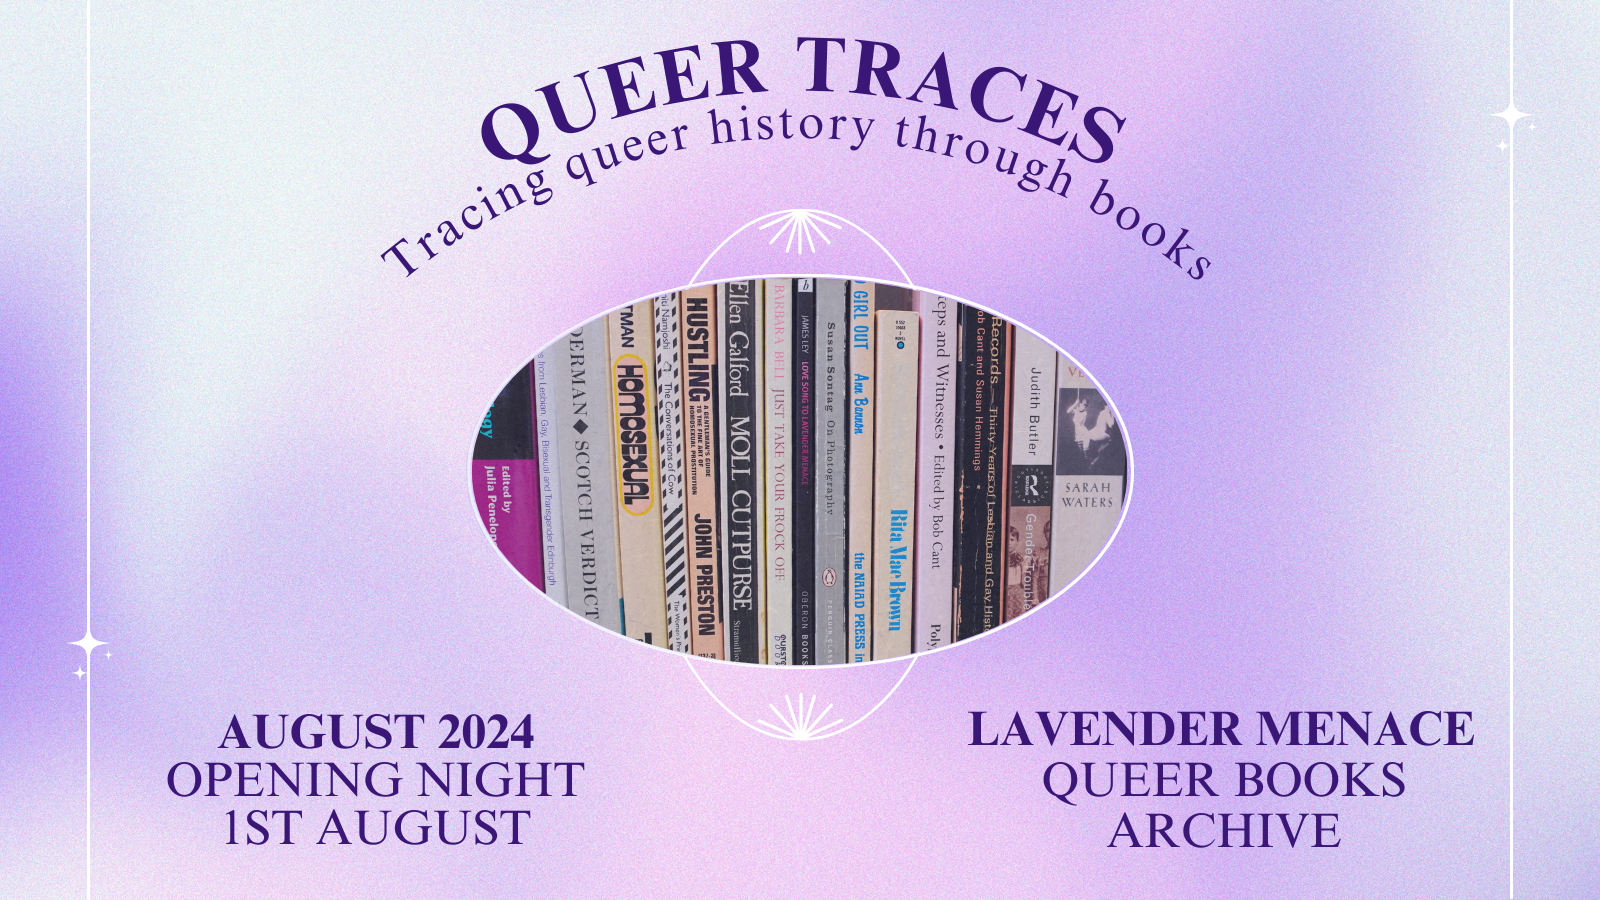 Decorative image with event information and a photo of queer books